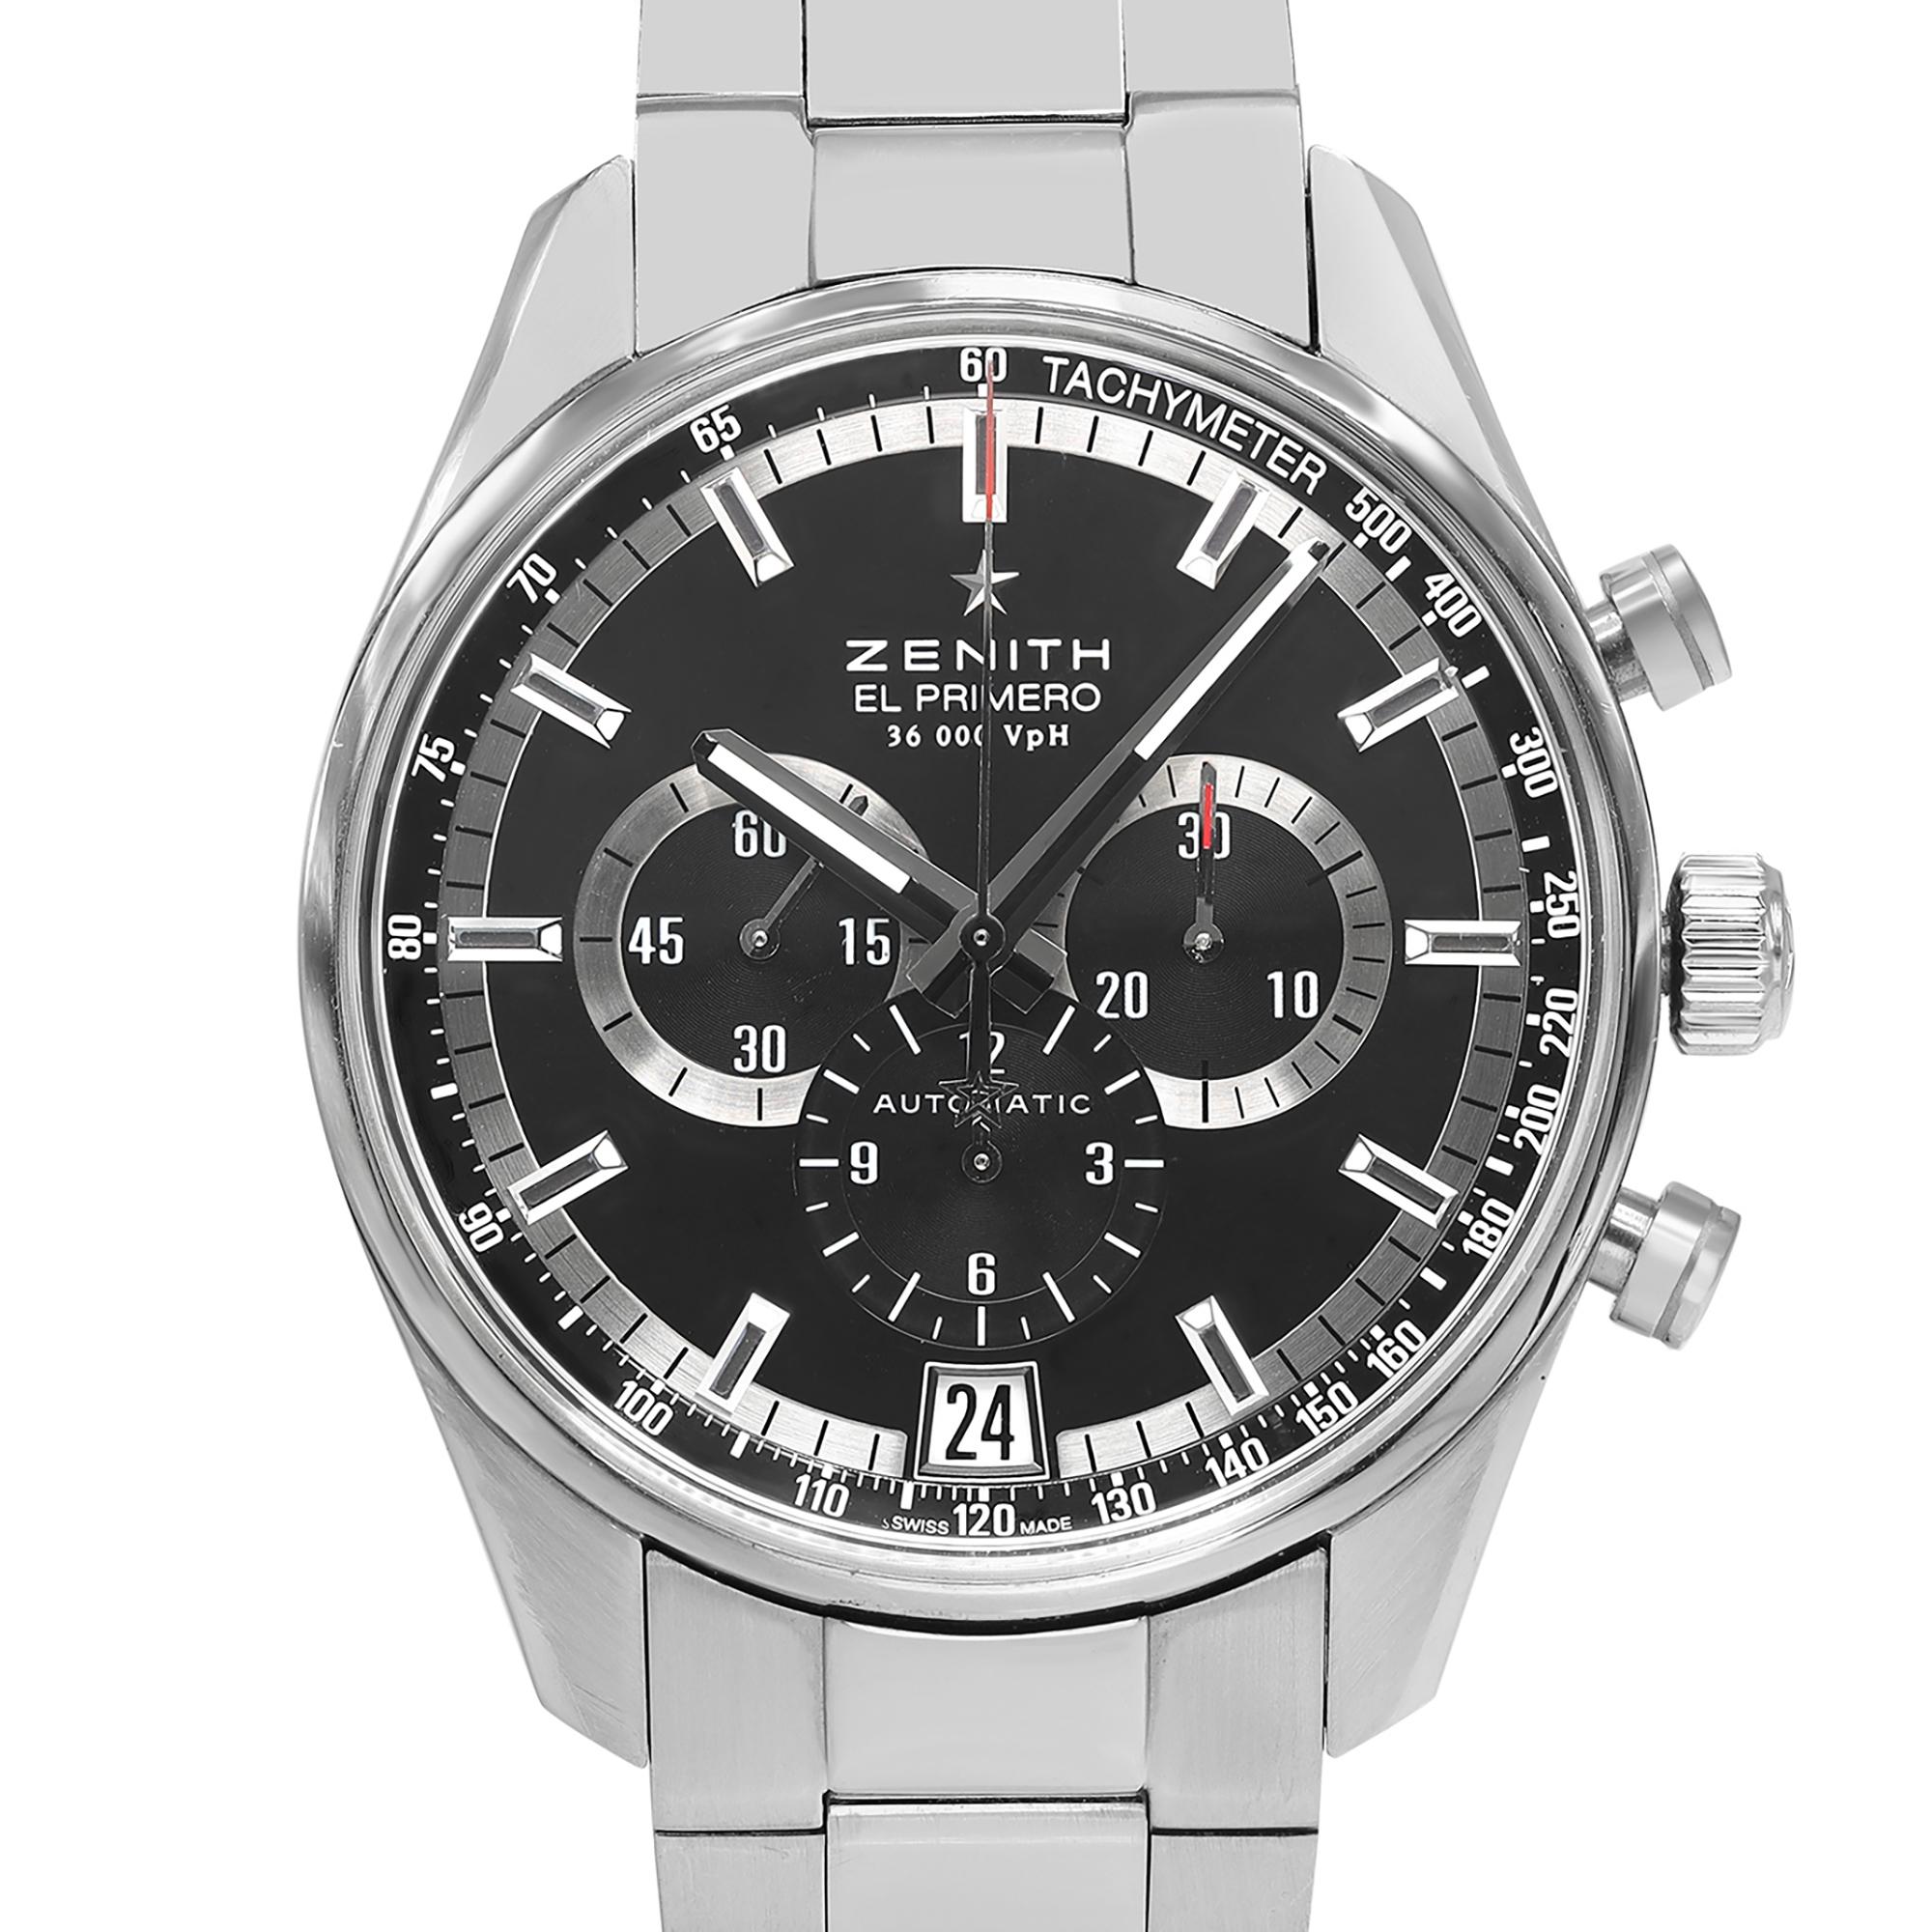 Pre-owned Zenith el Primero Men's Watch 03.2040.400/21.M2040. The Watch has Micro Marks on 60 Seconds Sub dial, Hands and Tiny Scratches on Crystal. This Beautiful Timepiece Is Powered by a Mechanical (Automatic) Movement and Features: Stainless